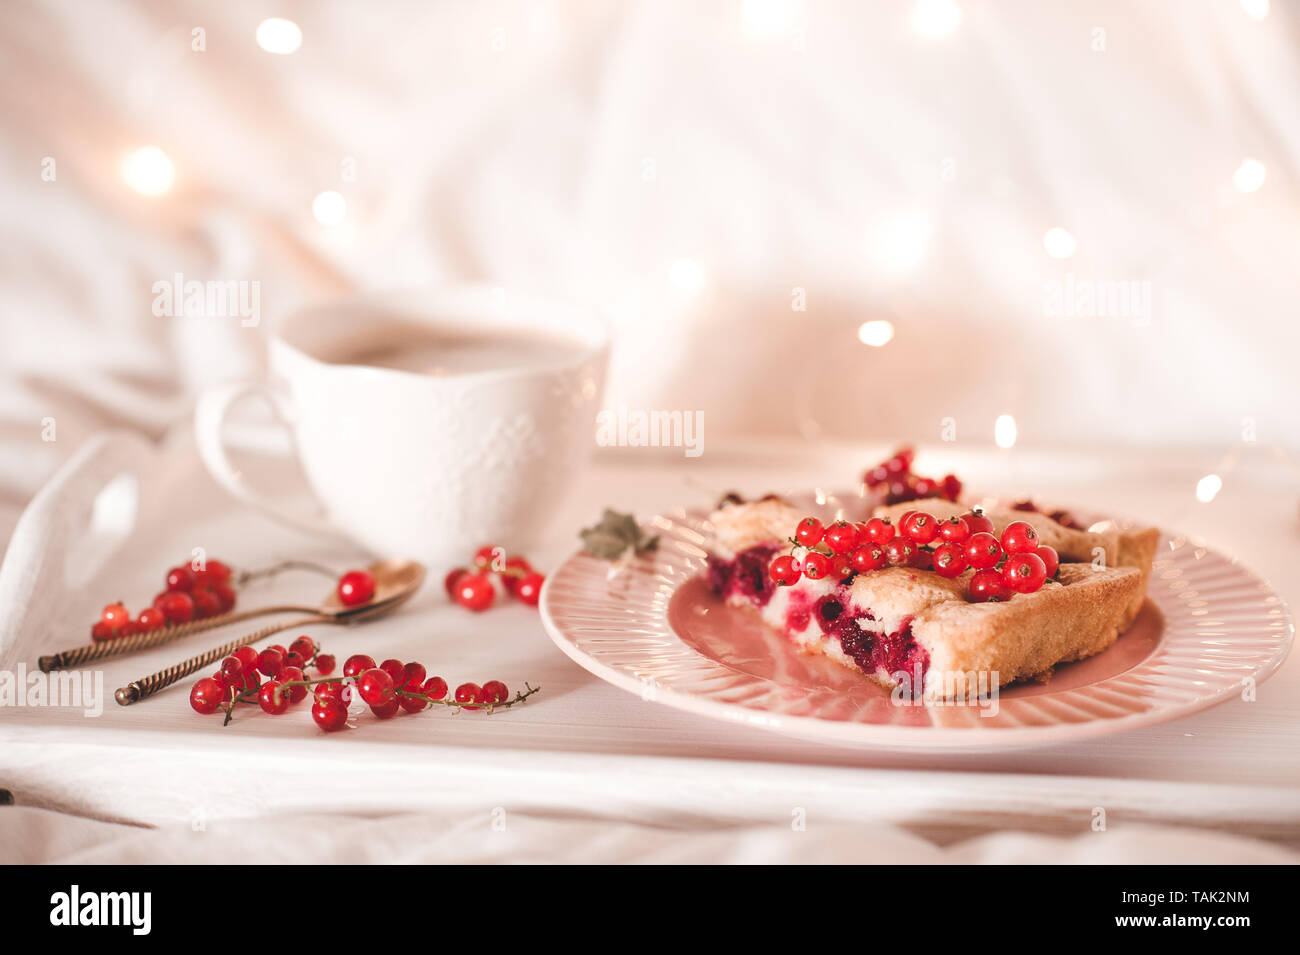 Cup of coffee with fruit cake on white tray closeup. Good morning. Stock Photo